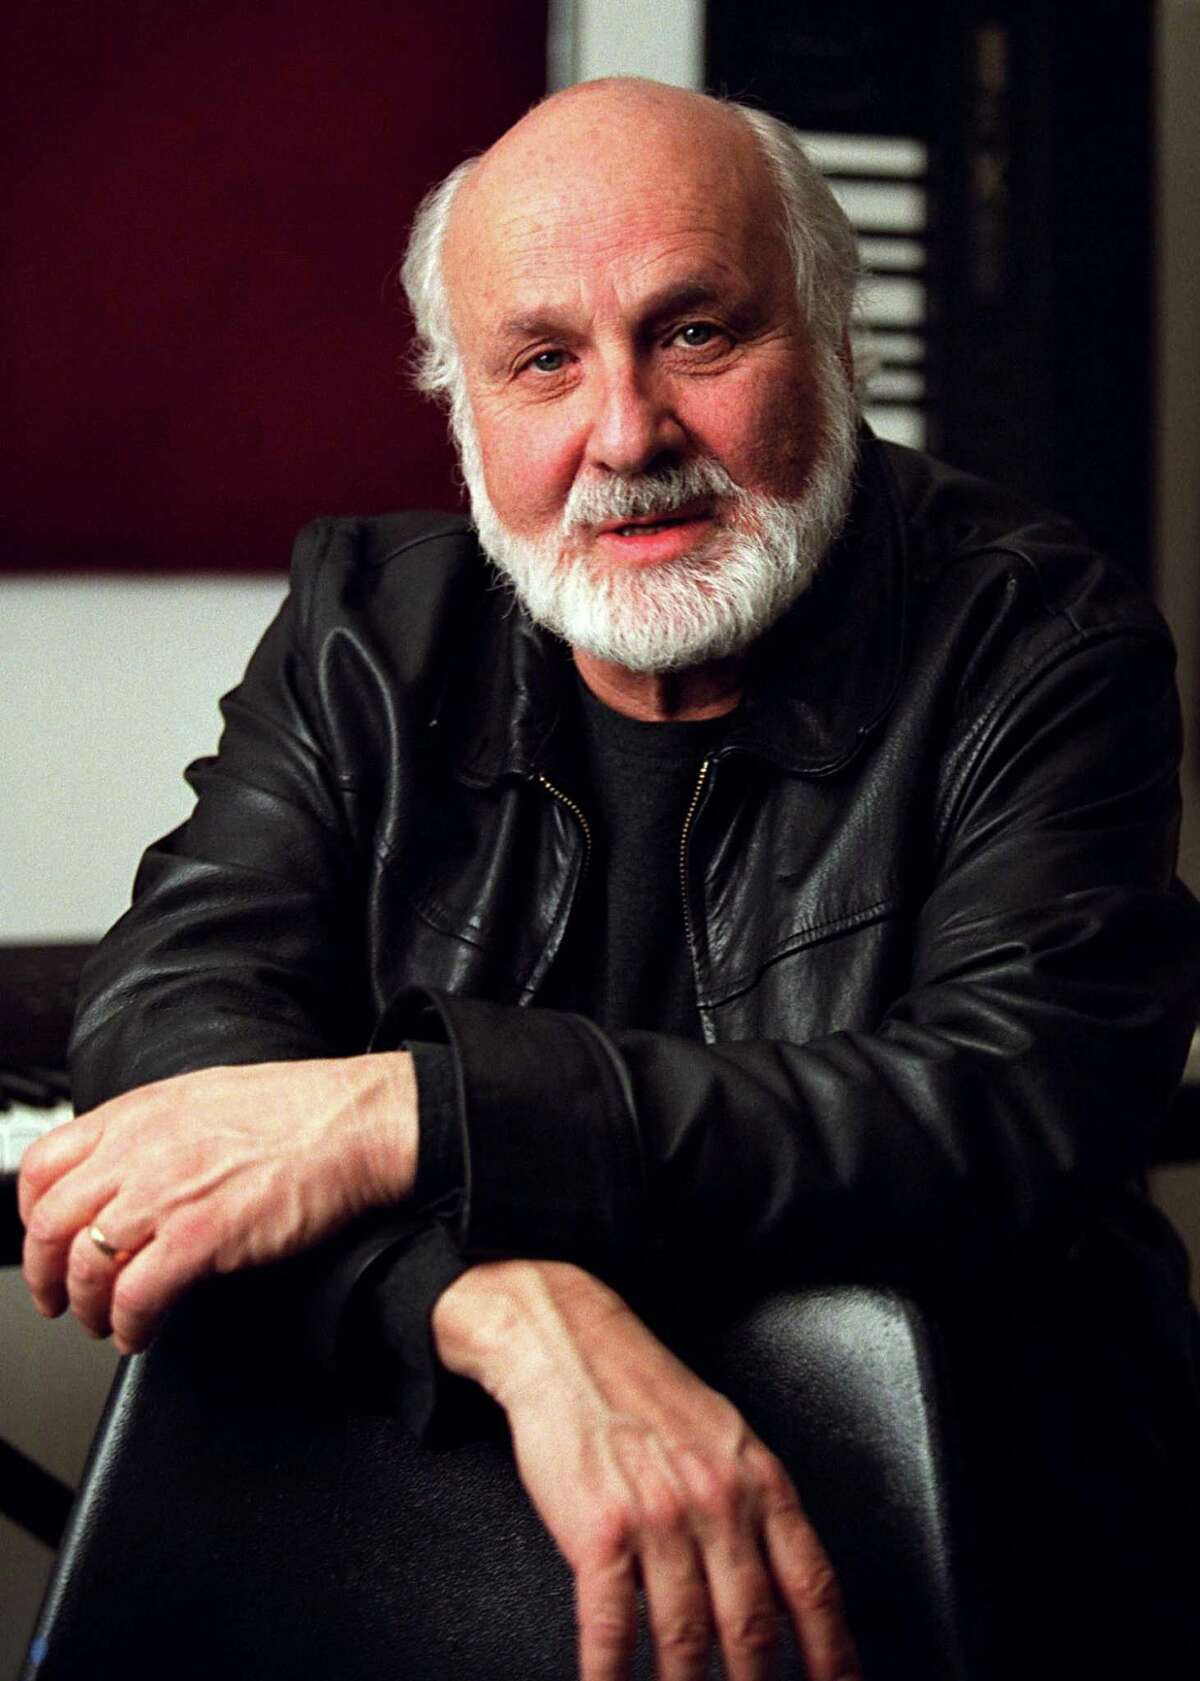 Morton Subotnick, a legendary pioneer in the field of electronic music, will be celebrating his 80th birthday with a residency and performance at Urban 15 Feb. 21-23.